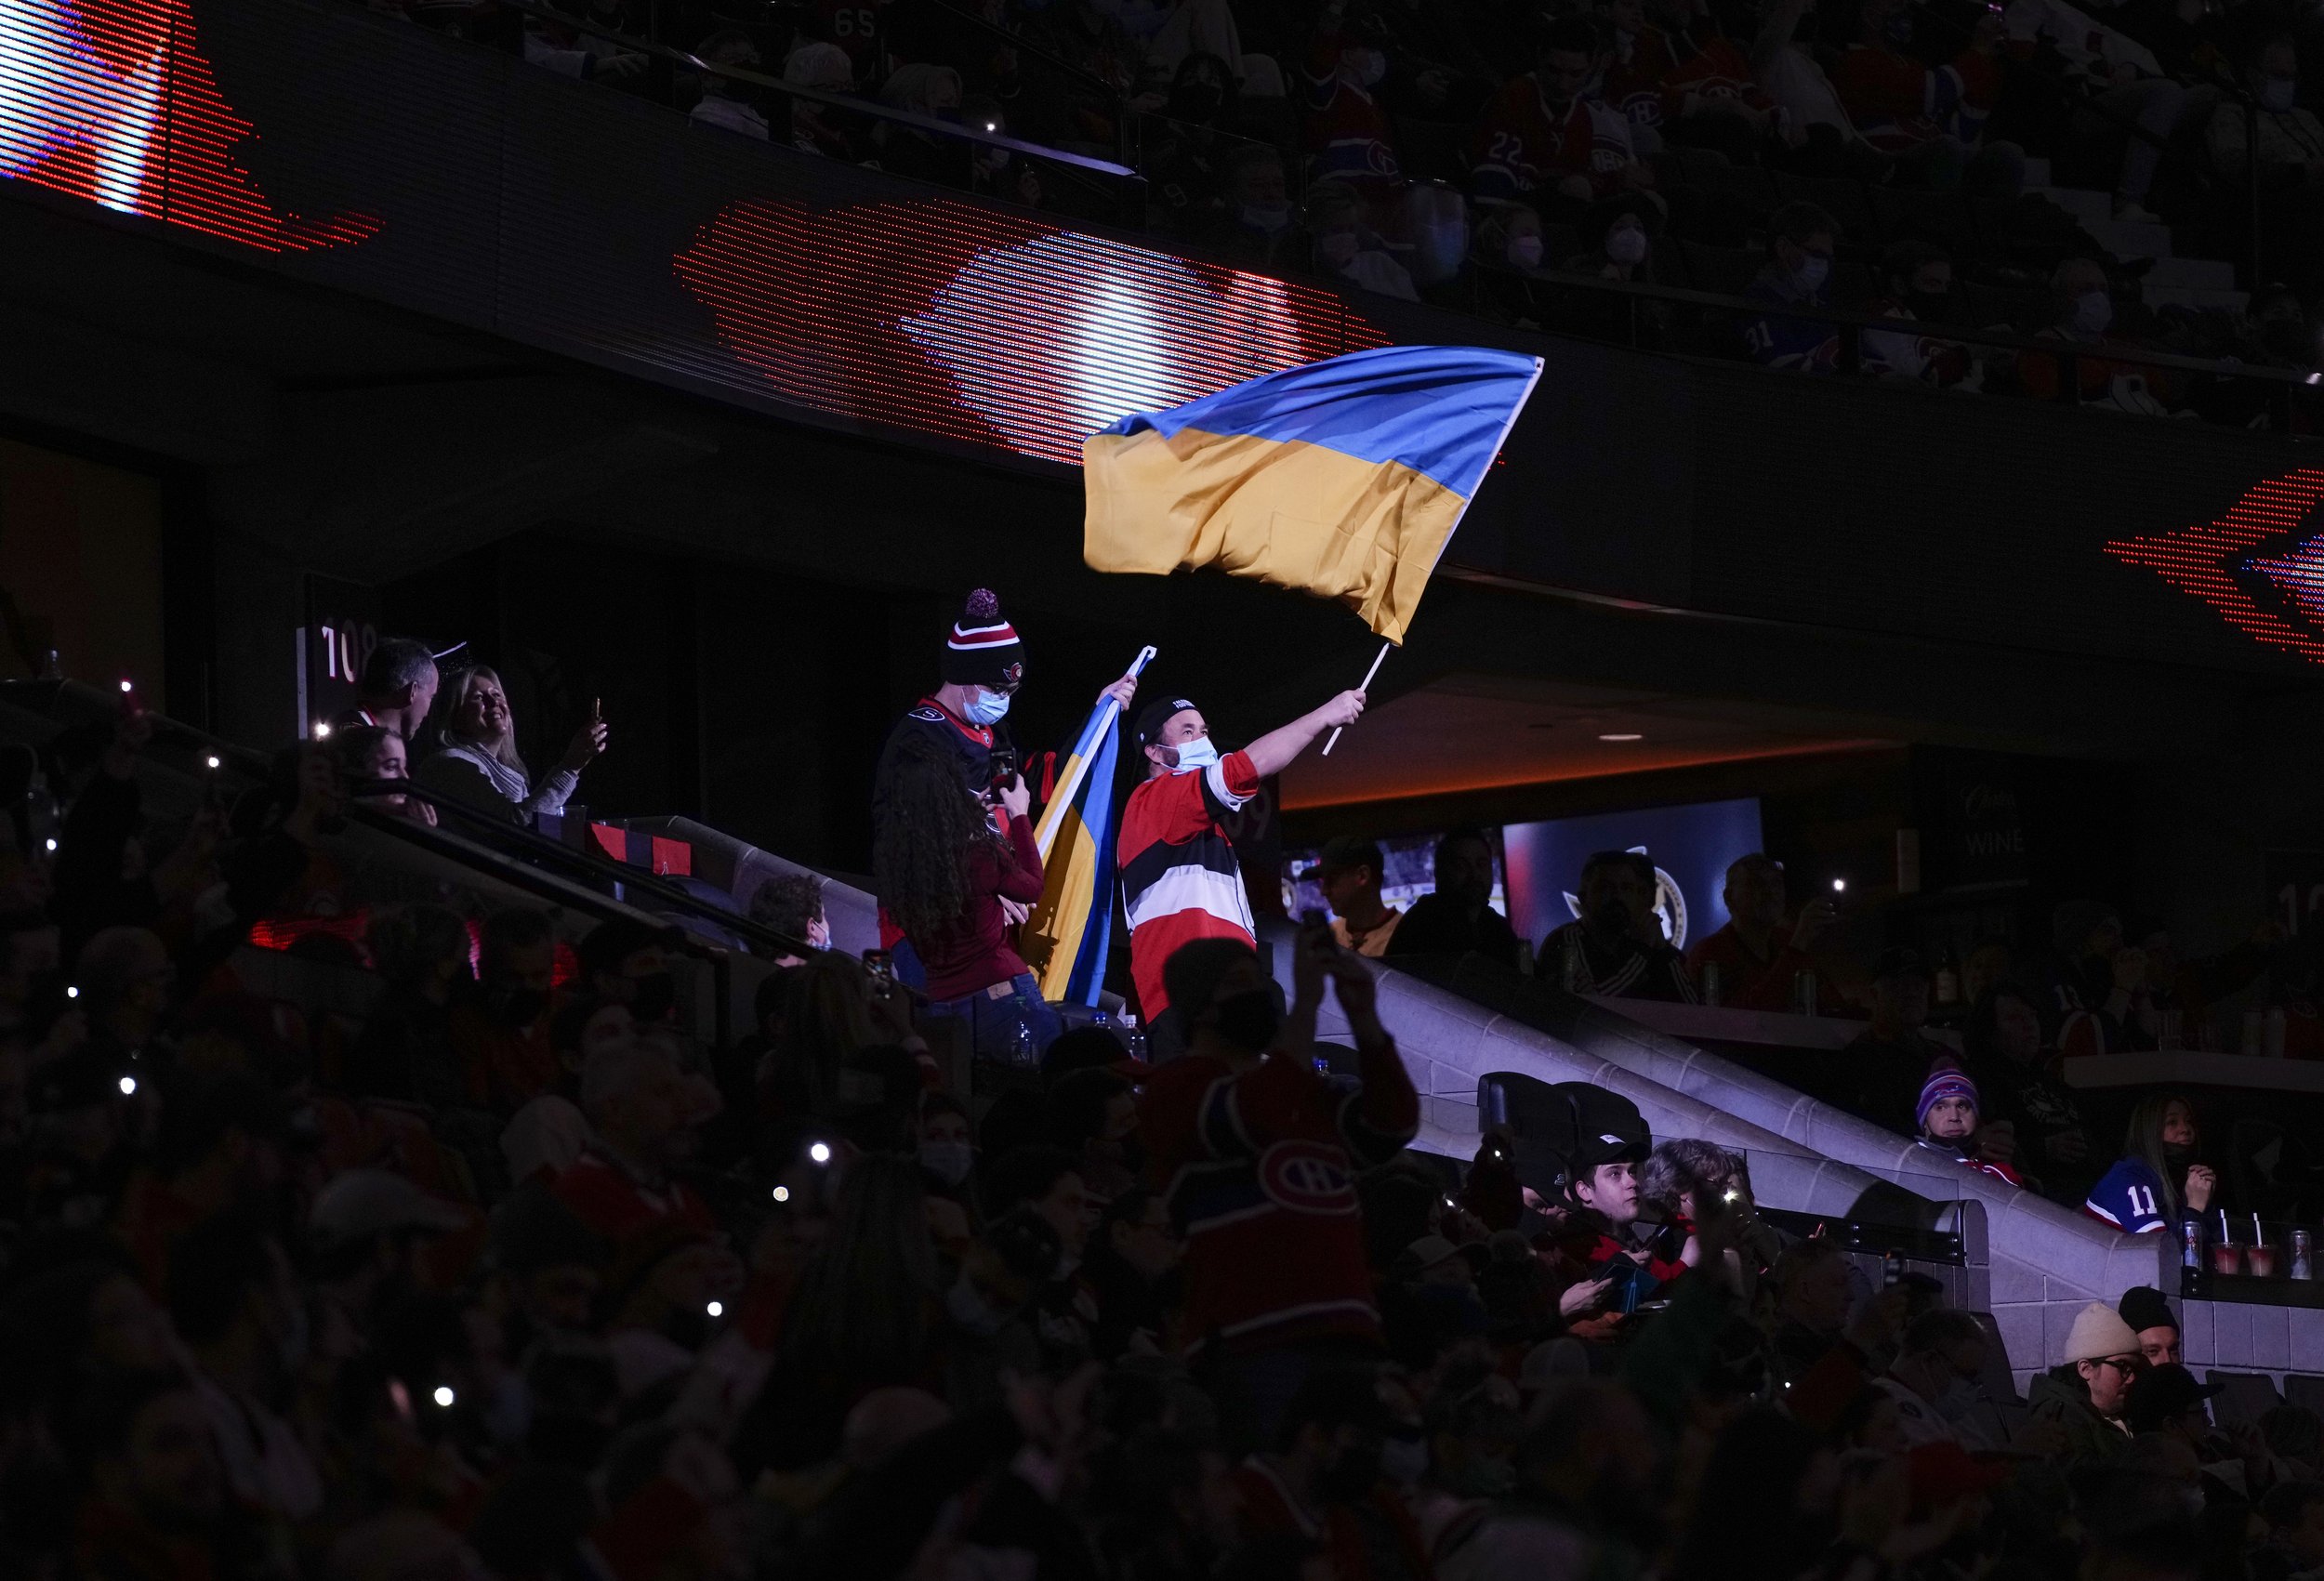  A fan waves the flag of Ukraine during the first intermission of an NHL hockey game between the Ottawa Senators and the Montreal Canadiens on Saturday, Feb. 26, 2022 in Ottawa, Ontario. (Justin Tang/The Canadian Press via AP) 